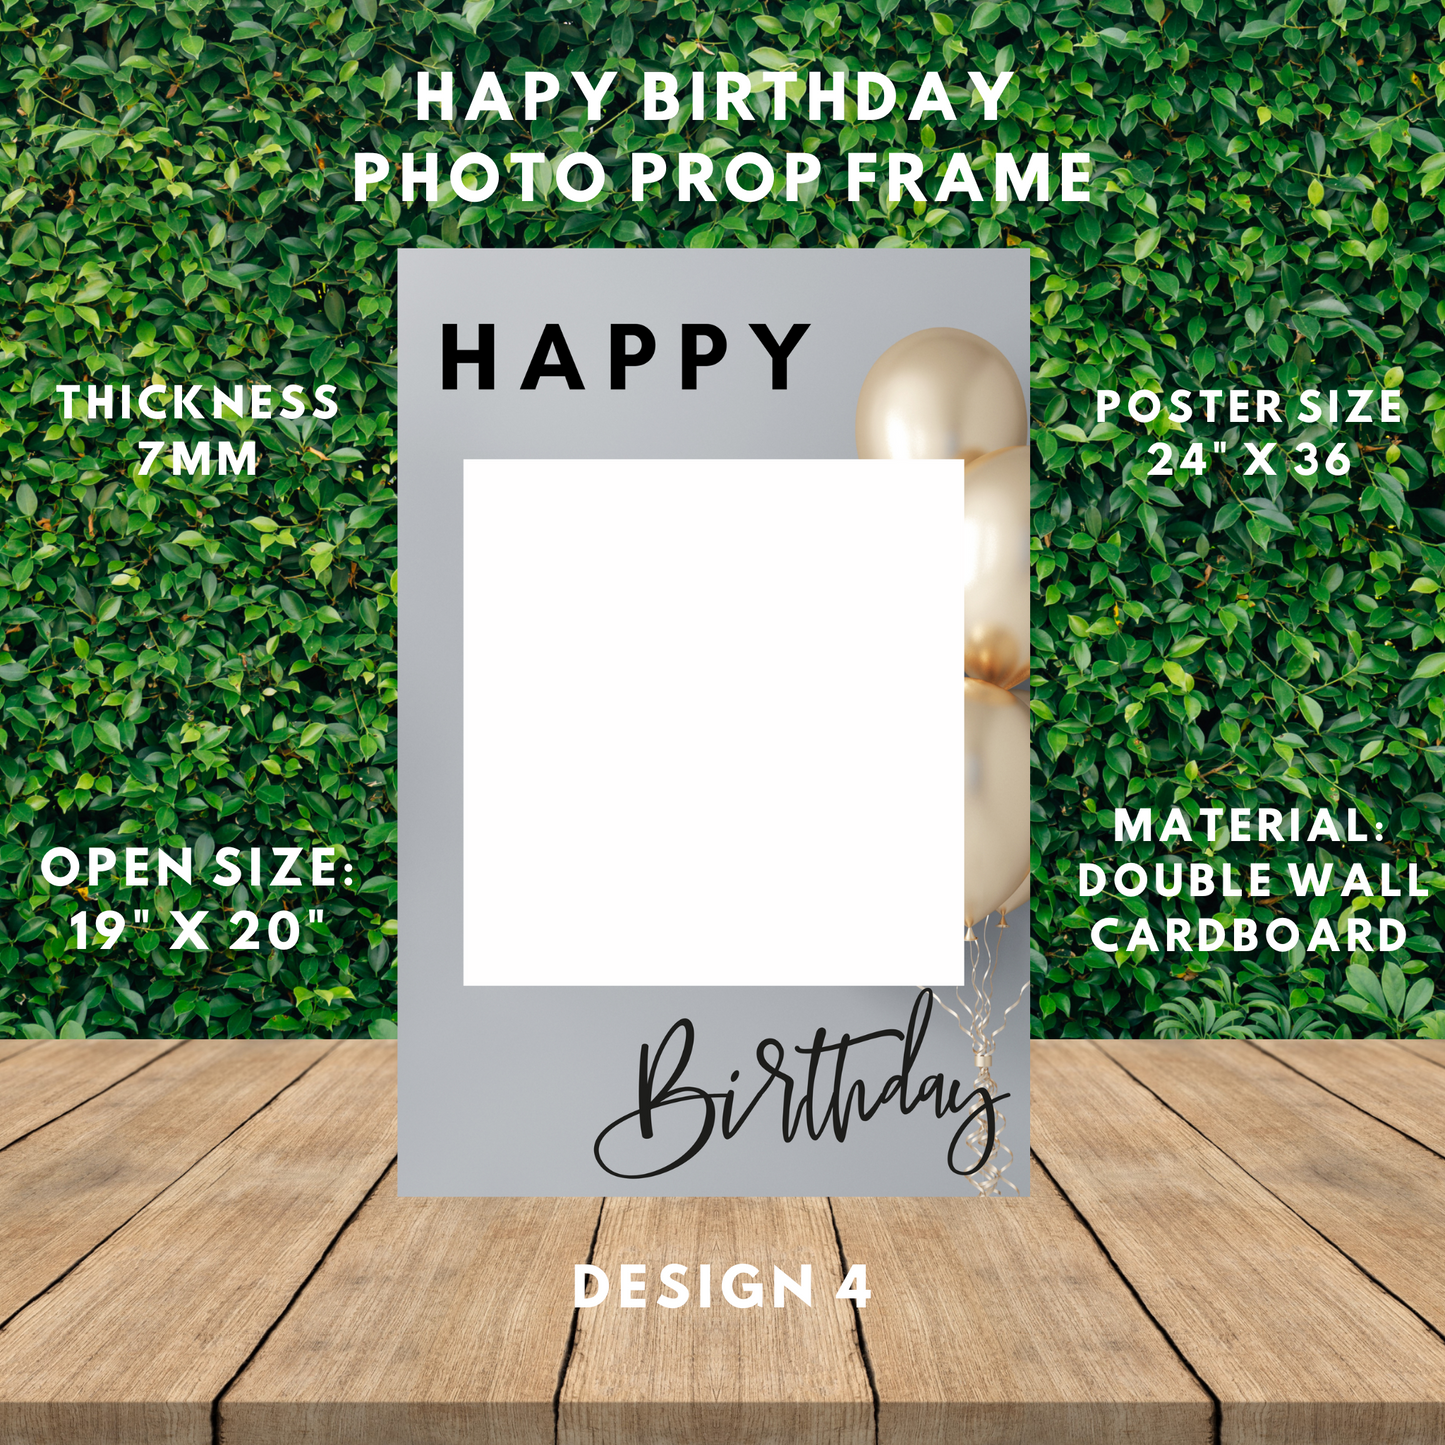 Happy Birthday Photo Prop Frame, Made Out of White Cardboard 7mm